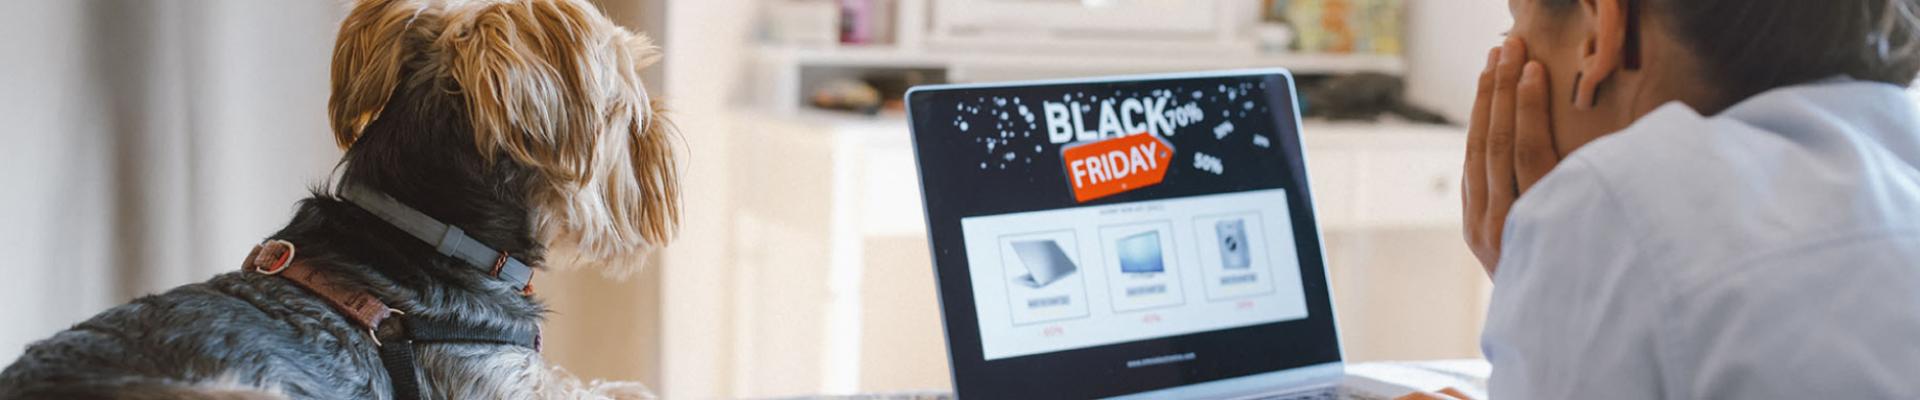 Woman looking at a 'Black Friday sale' on her laptop